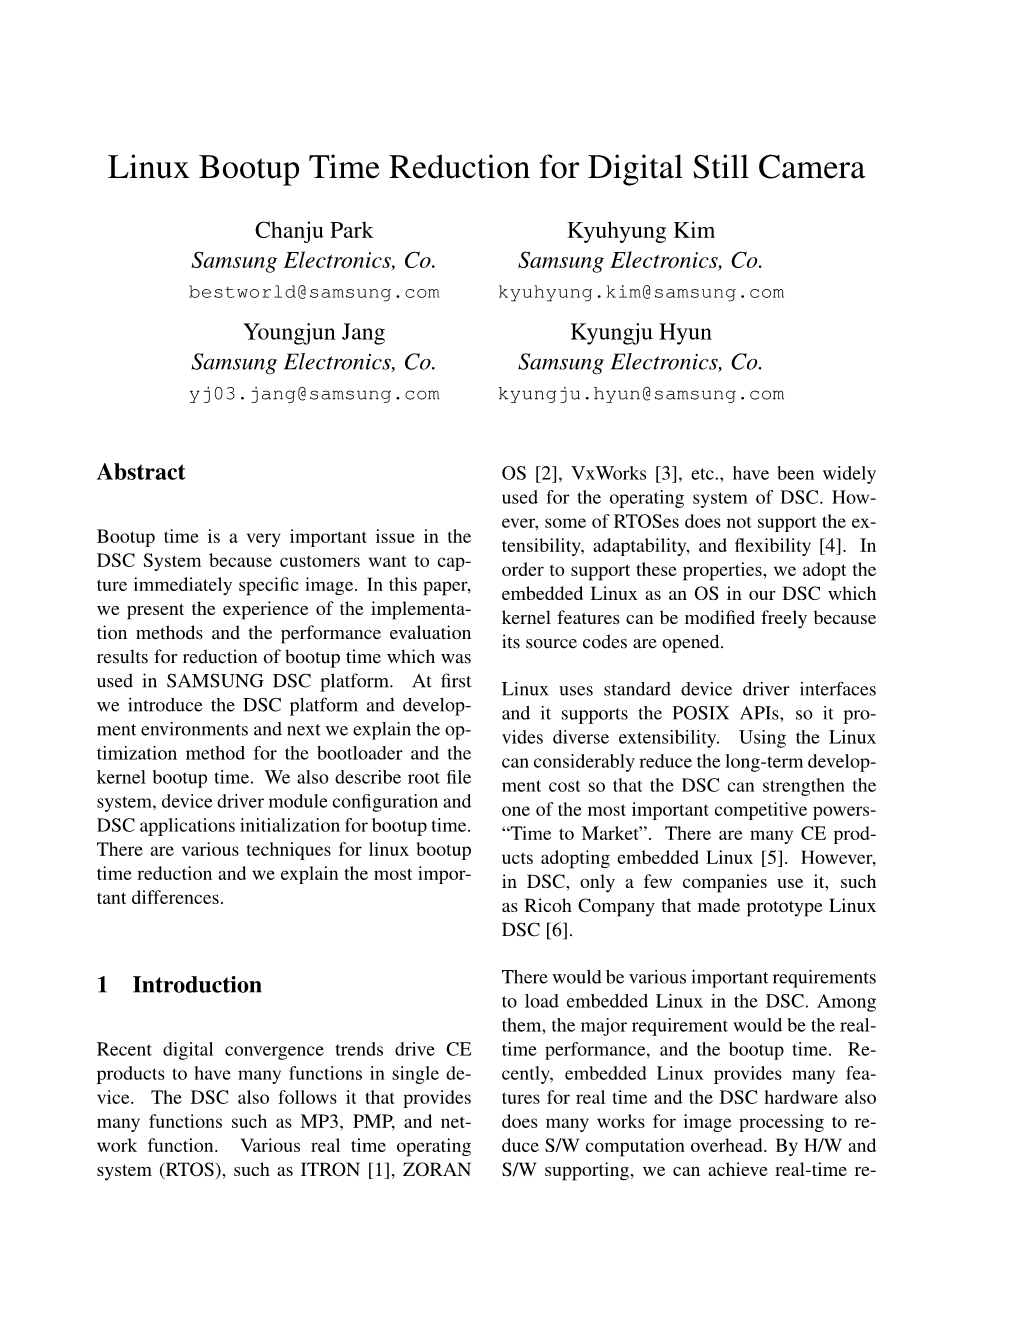 Linux Bootup Time Reduction for Digital Still Camera